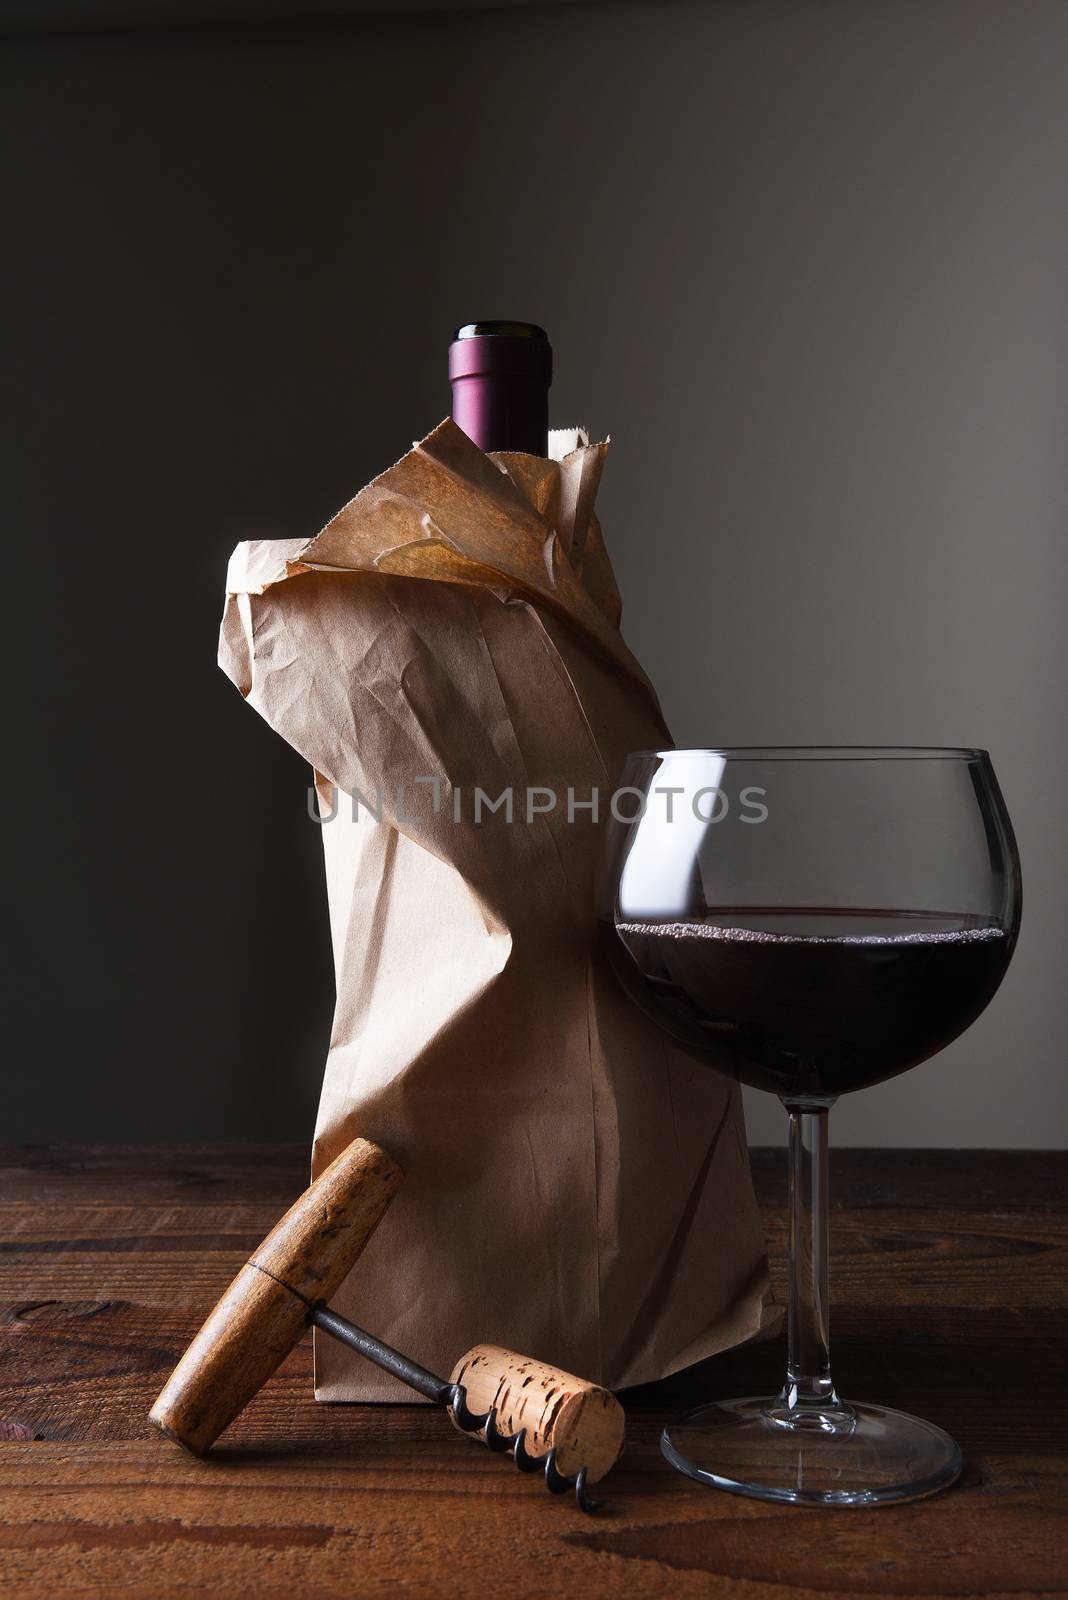 Closeup of a wine bottle in a paper bag on a wooden table with a glass and corkscrew.